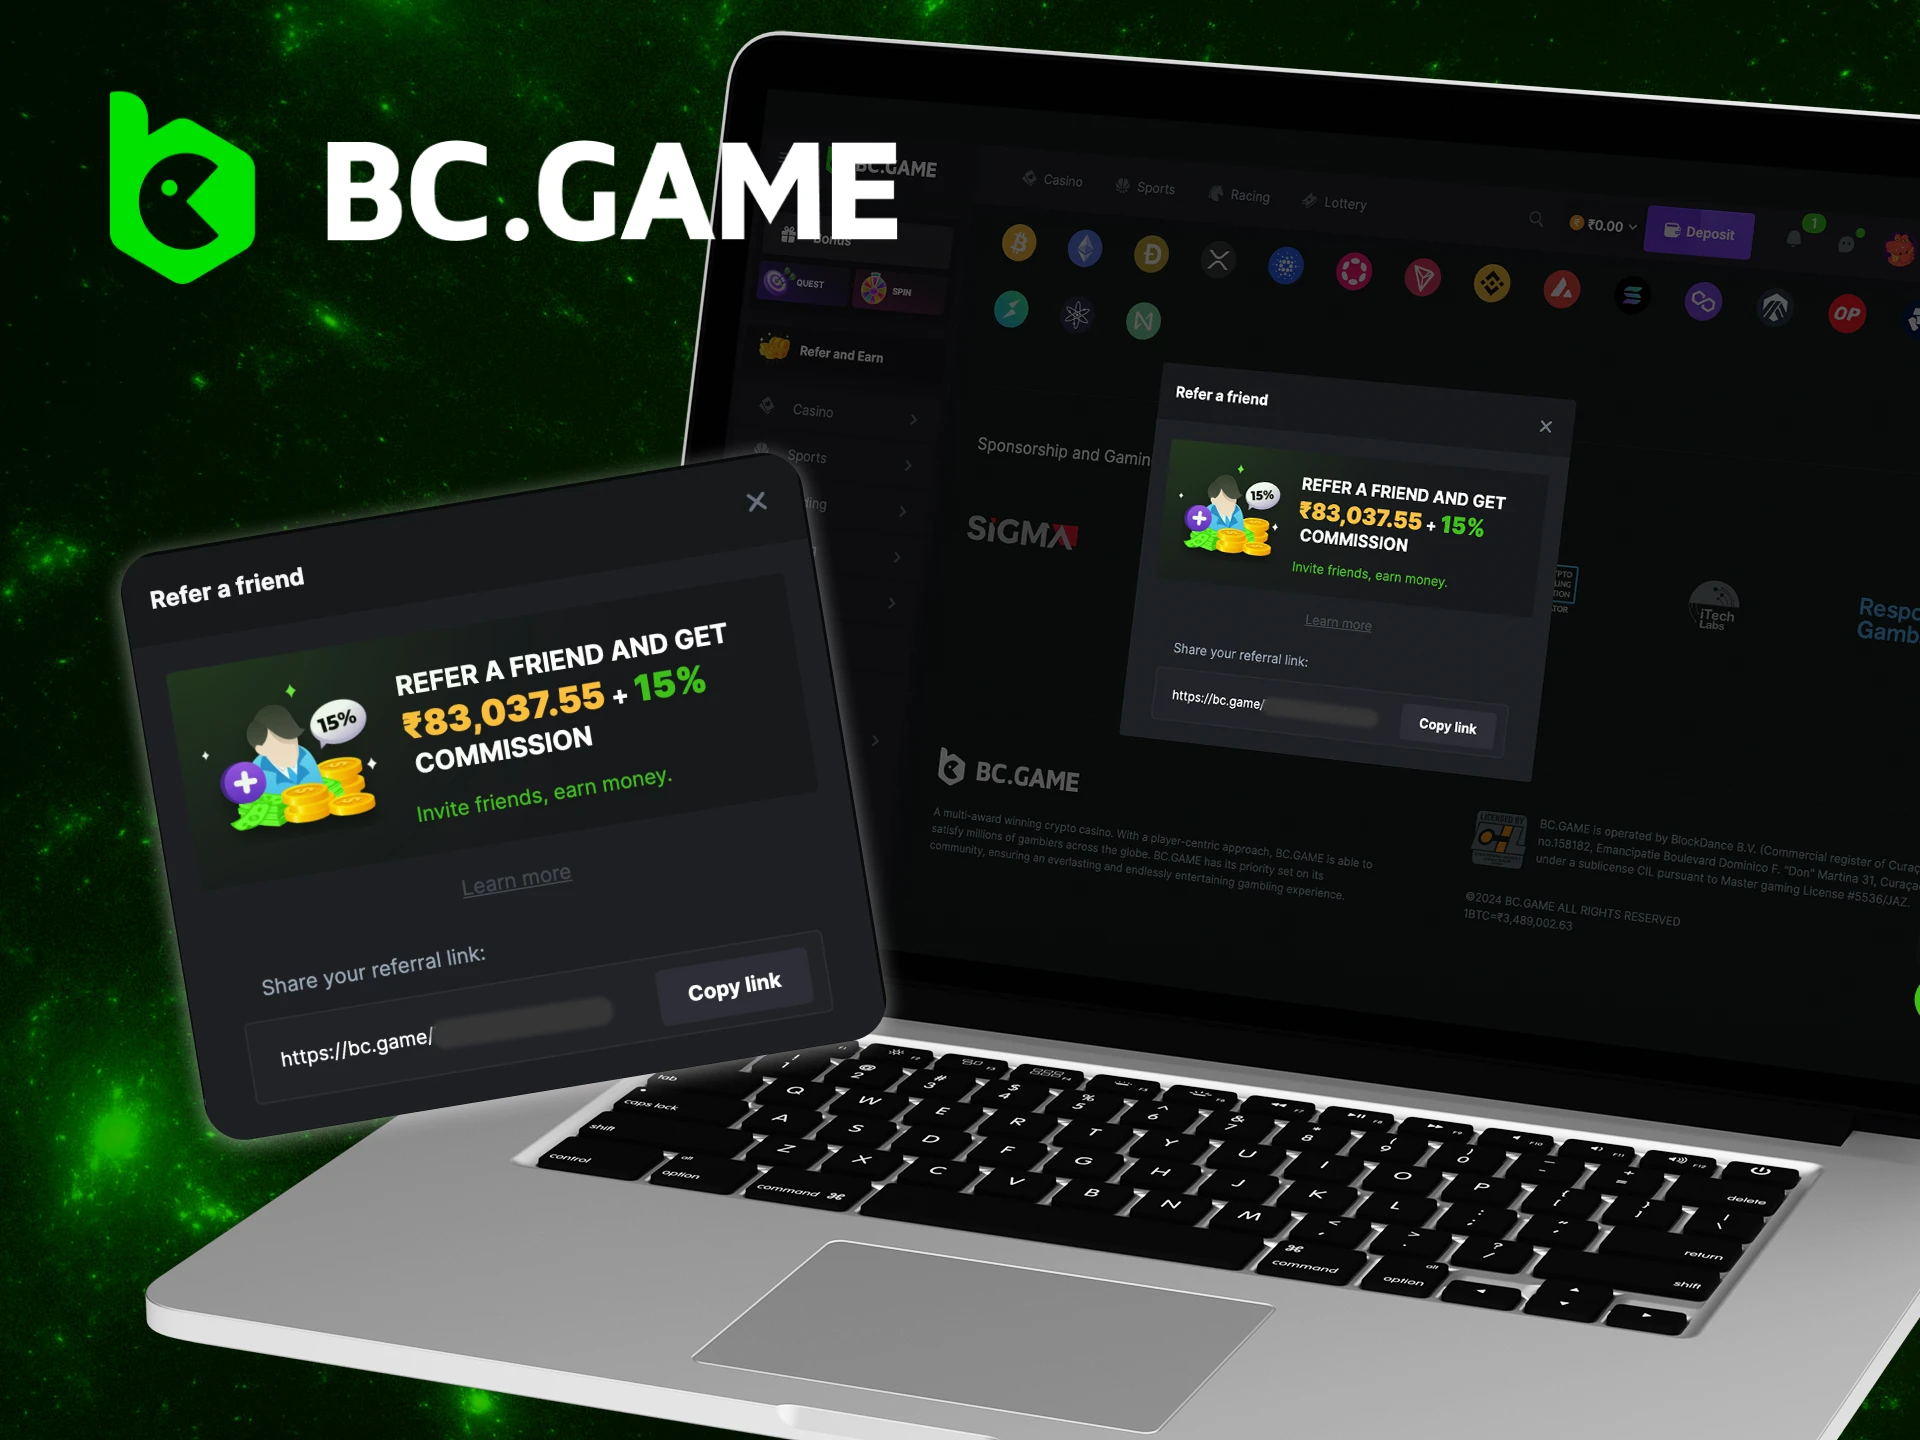 What will I get if I refer a friend using the BC Game referral link.